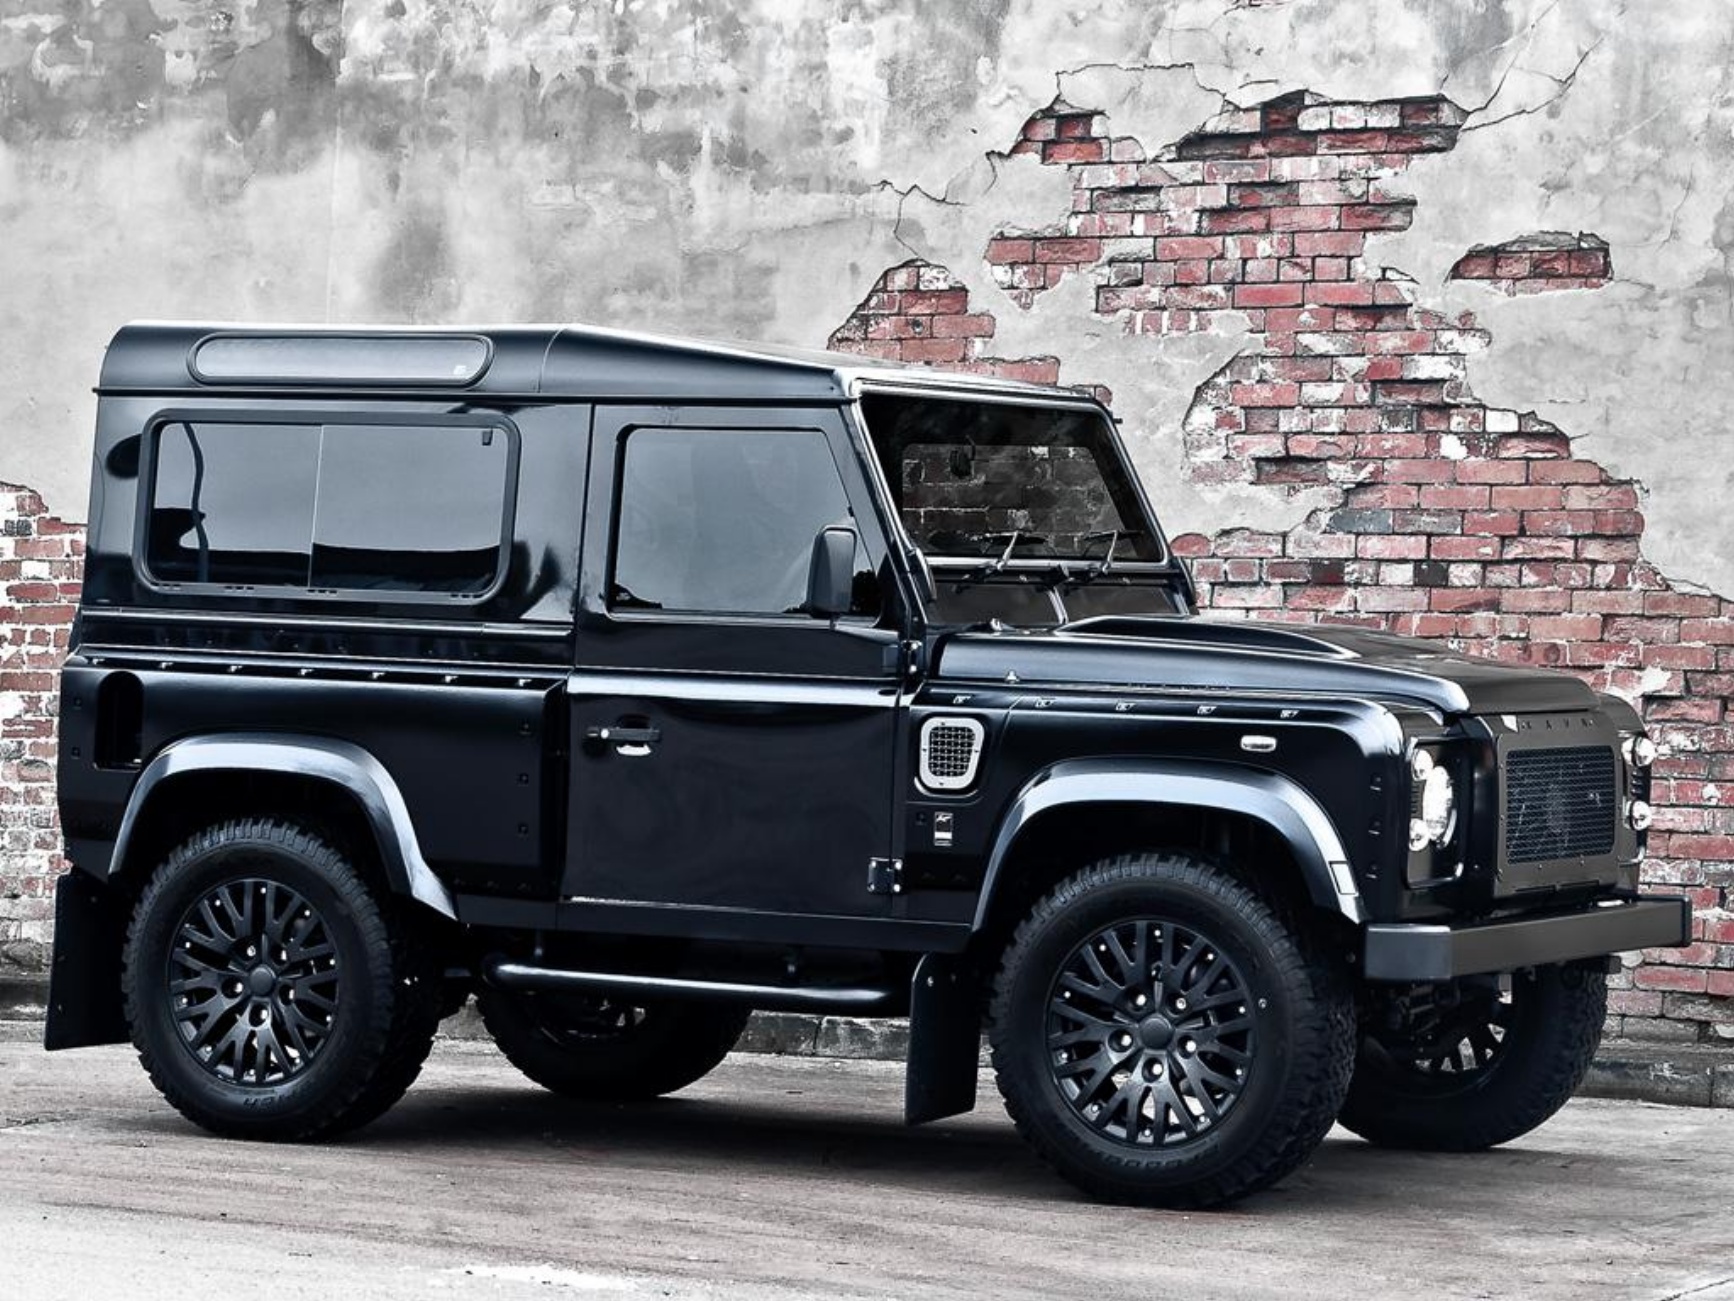 Download Latest HD Wallpaper of, Vehicles, 2013 Land Rover Defender